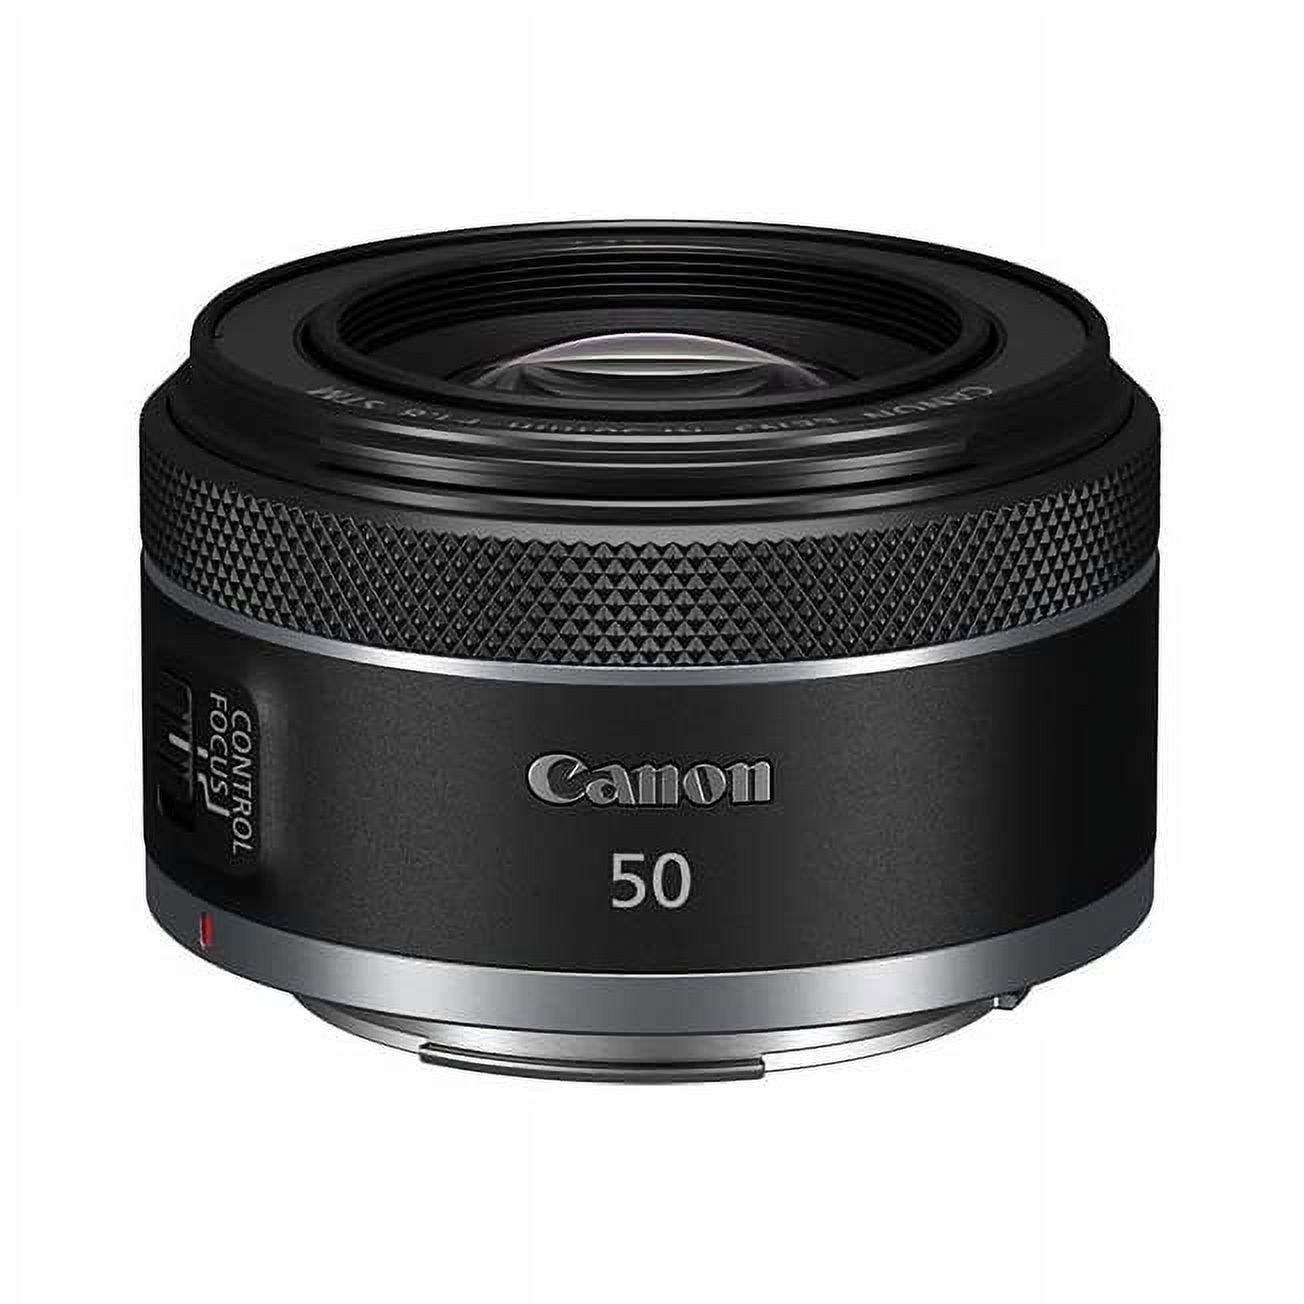 Canon RF50mm F1.8 STM for Canon Full Frame Mirrorless RF Mount Cameras [EOS R, EOS RP, EOS R5, EOS R6](4514C002) - image 1 of 4